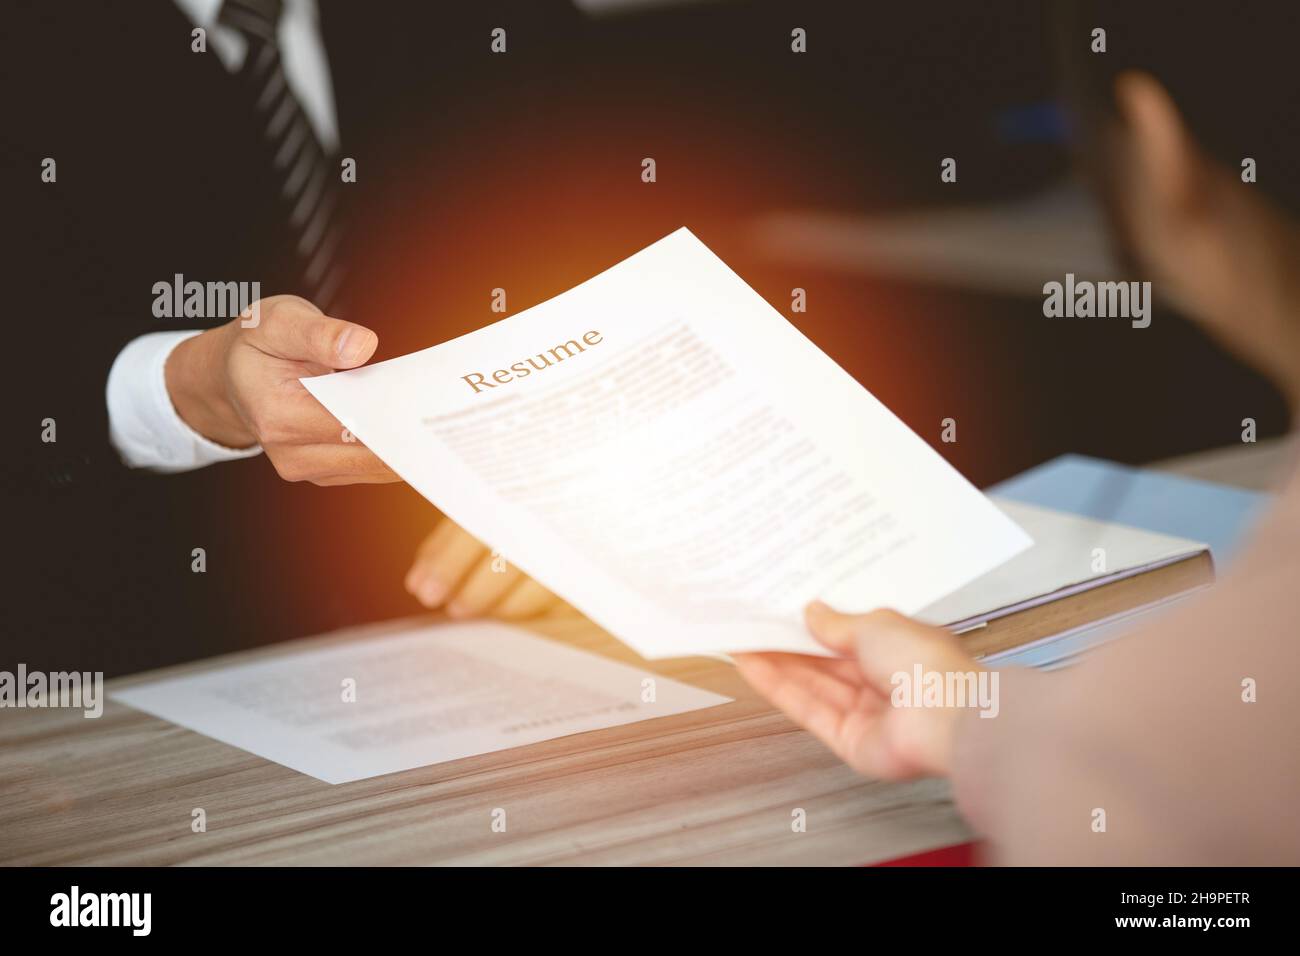 Business people Job Apply giving Resume CV document to HR for recruit new employee Stock Photo